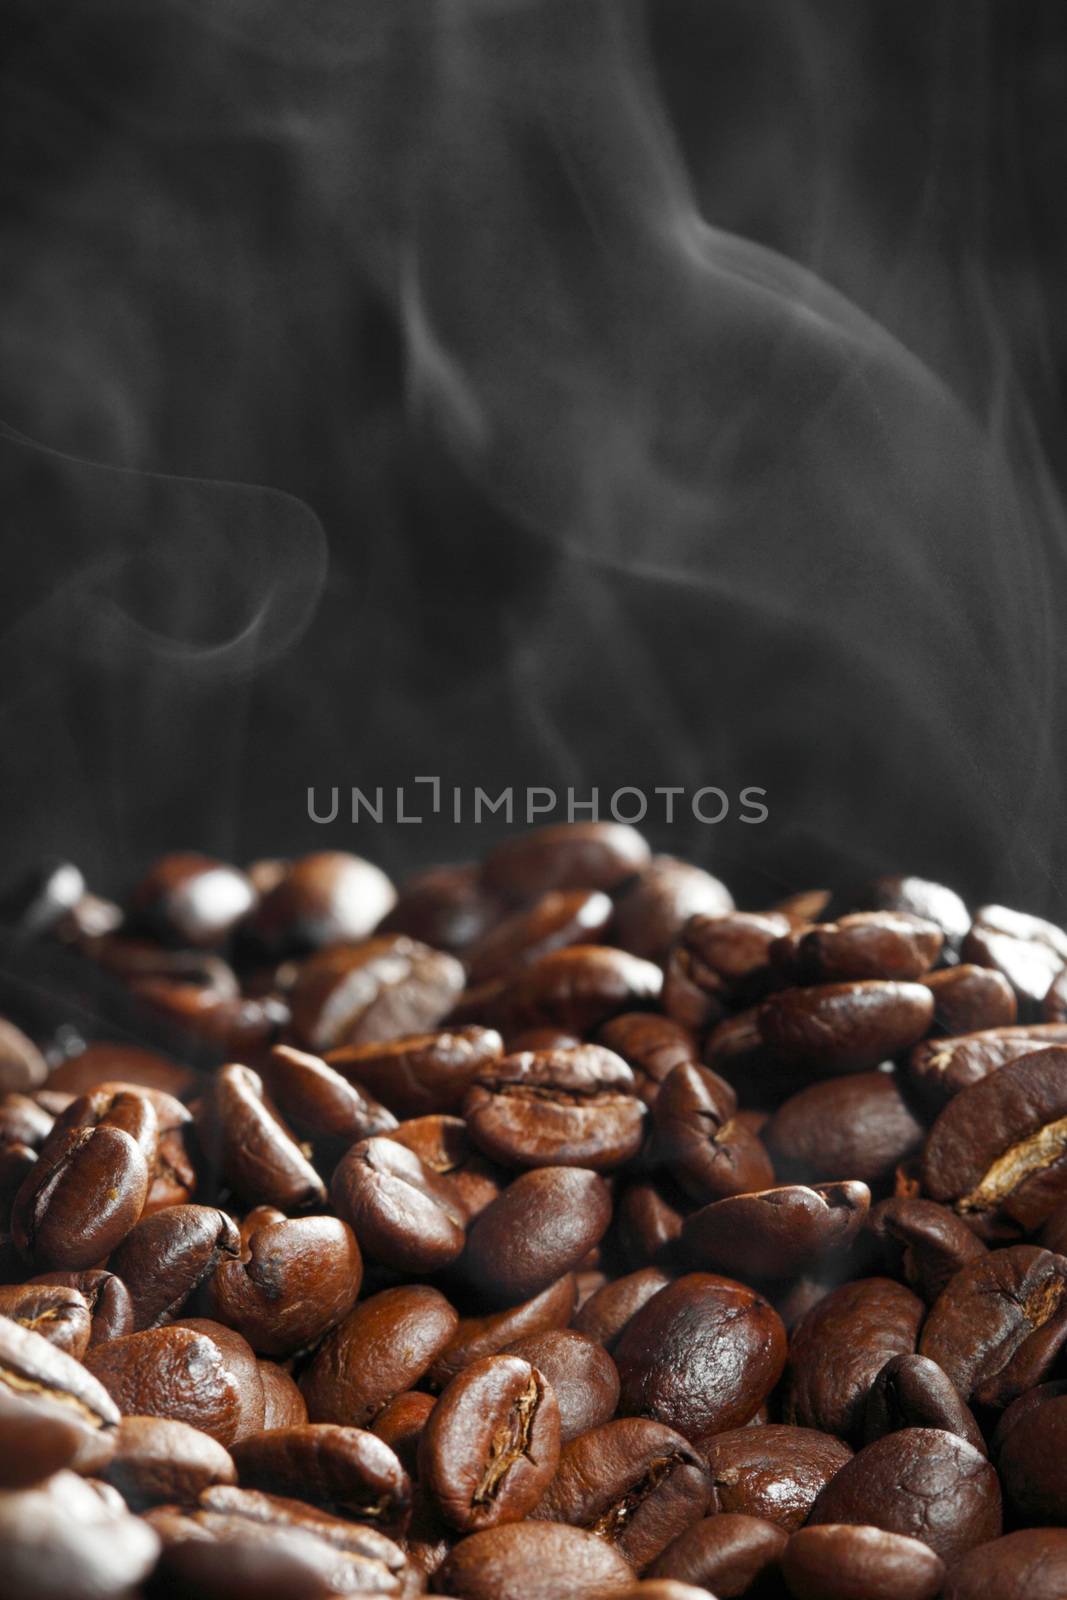 Hot roasted coffee beans by Yellowj